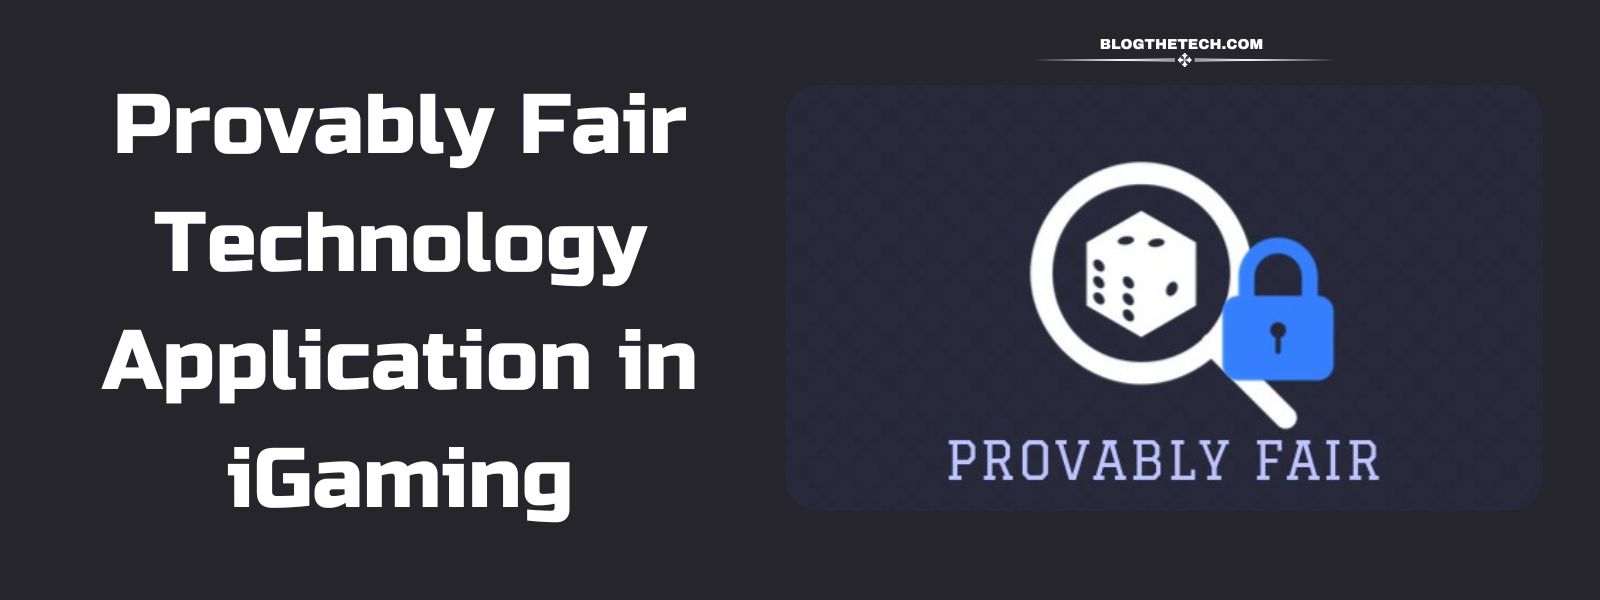 Provably Fair Technology Application in iGaming